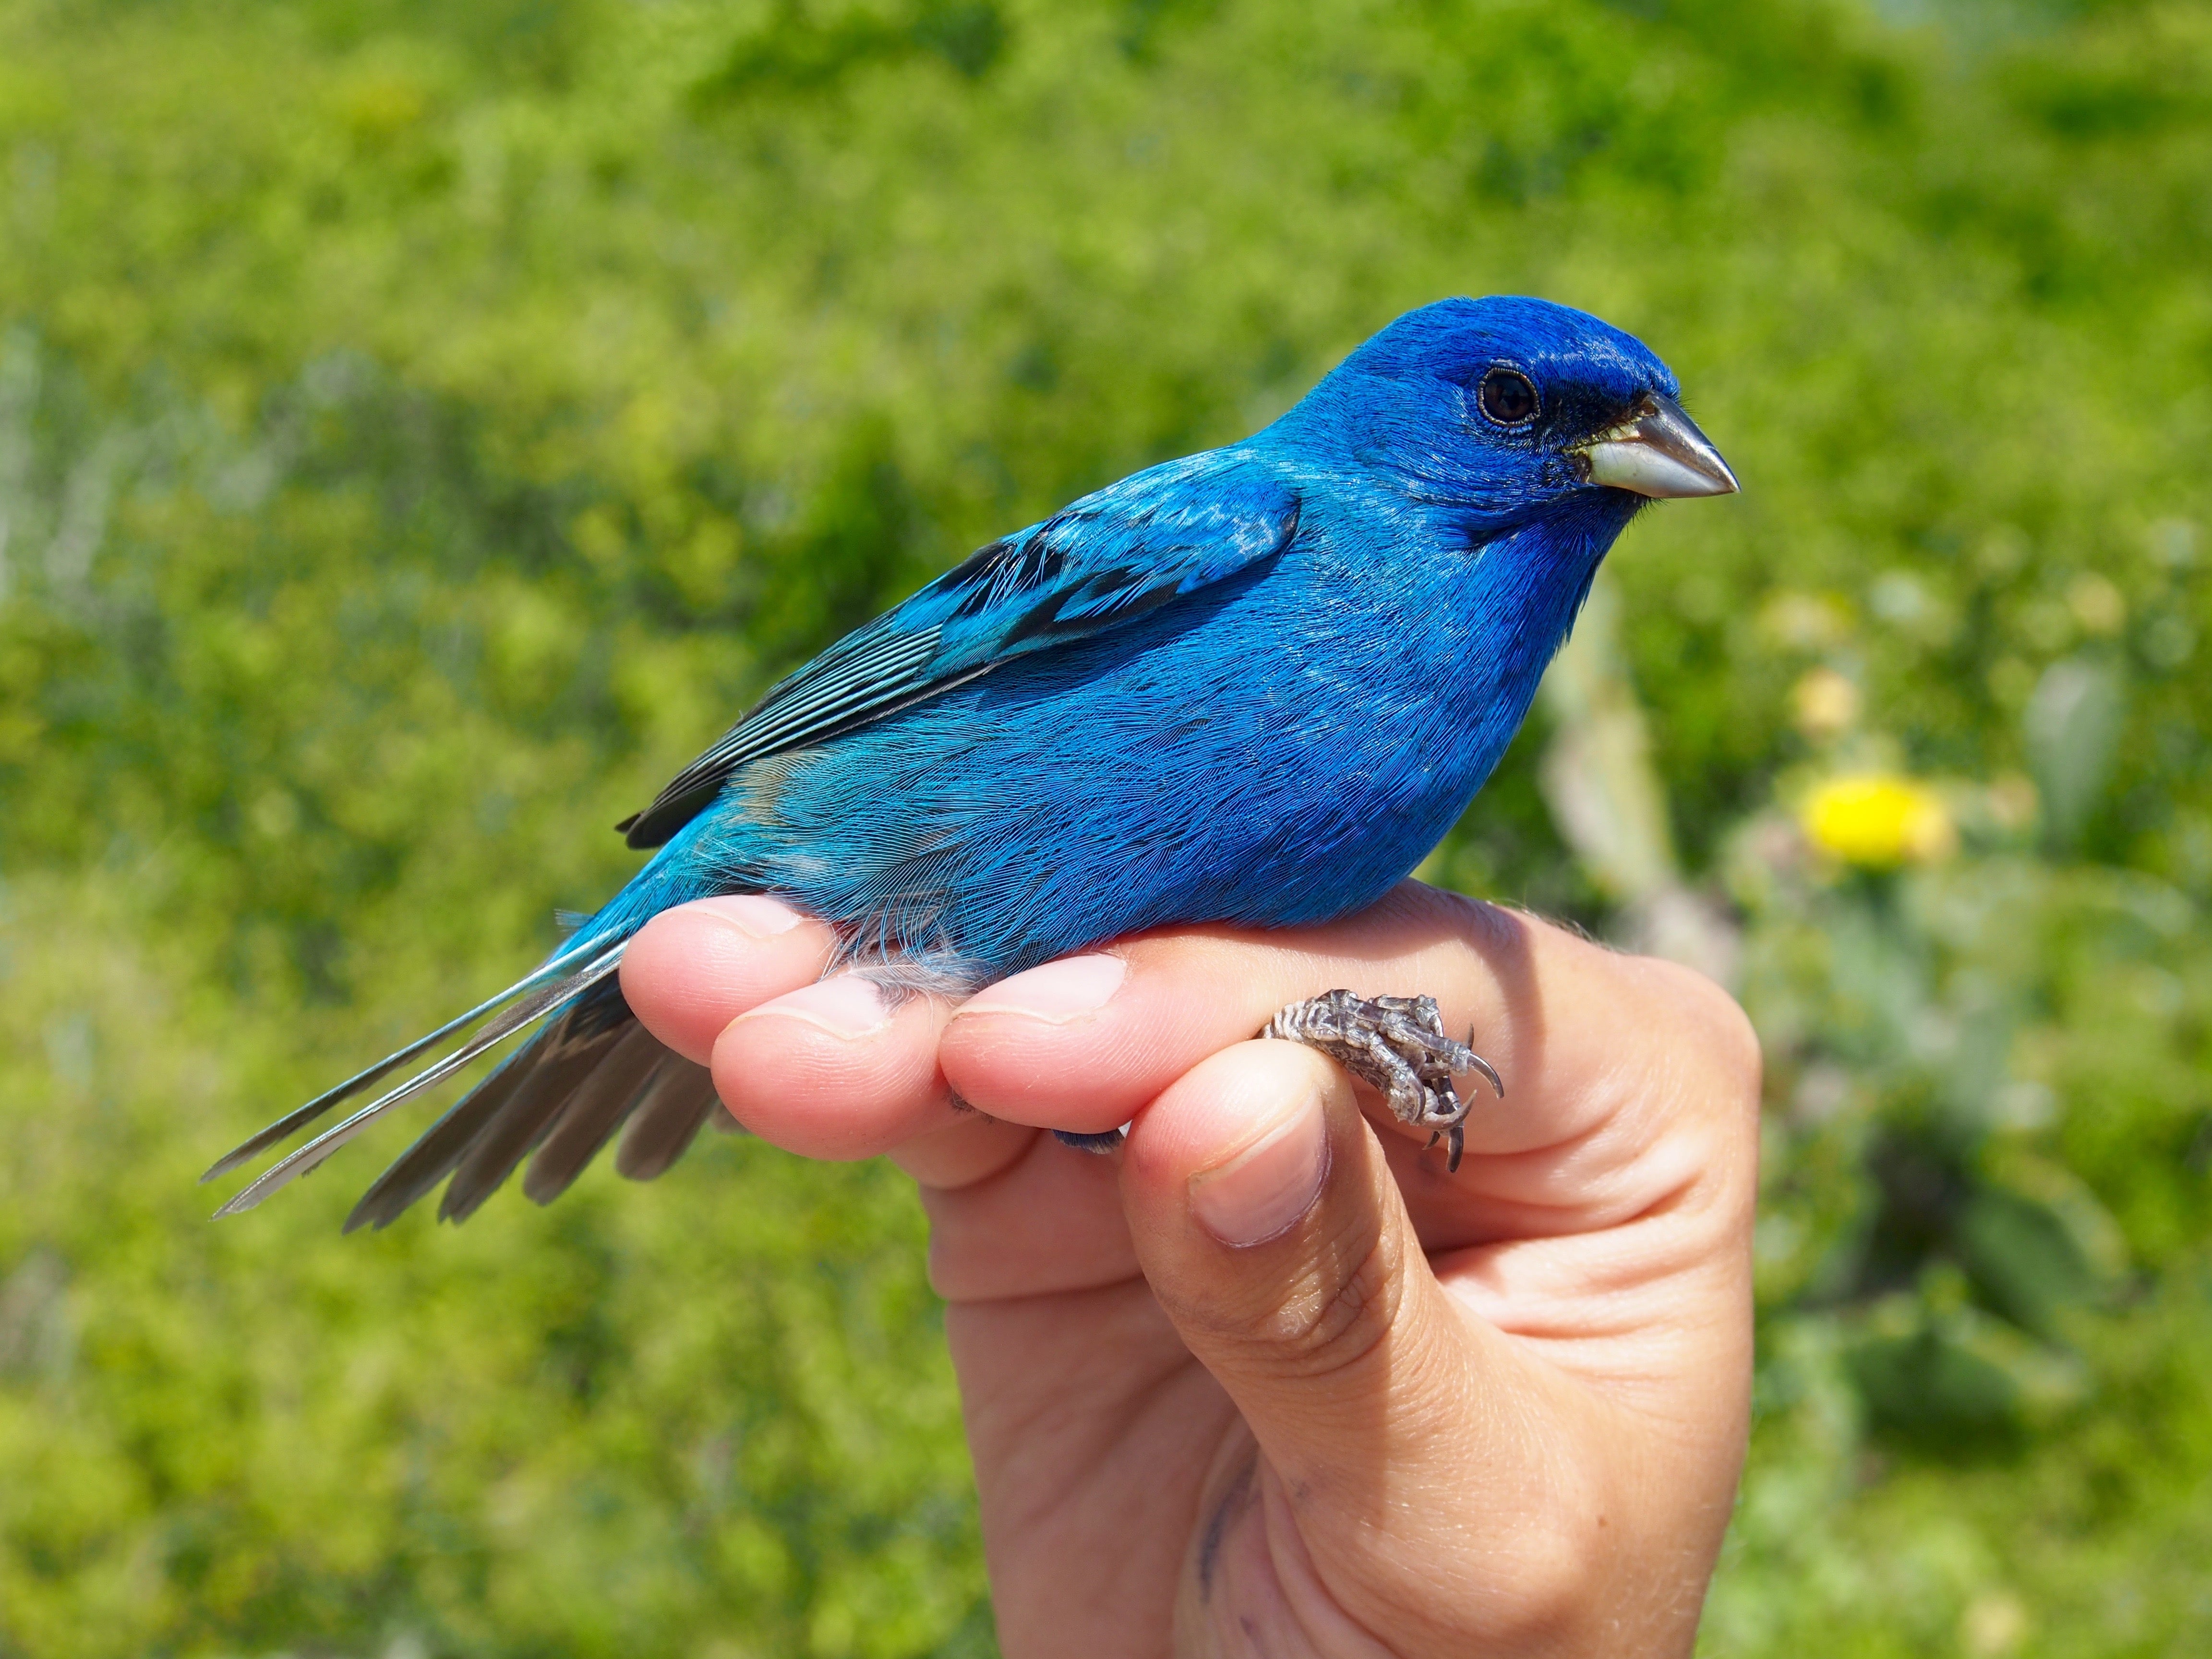 An indigo bunting, a colorful songbird, in someone's hand